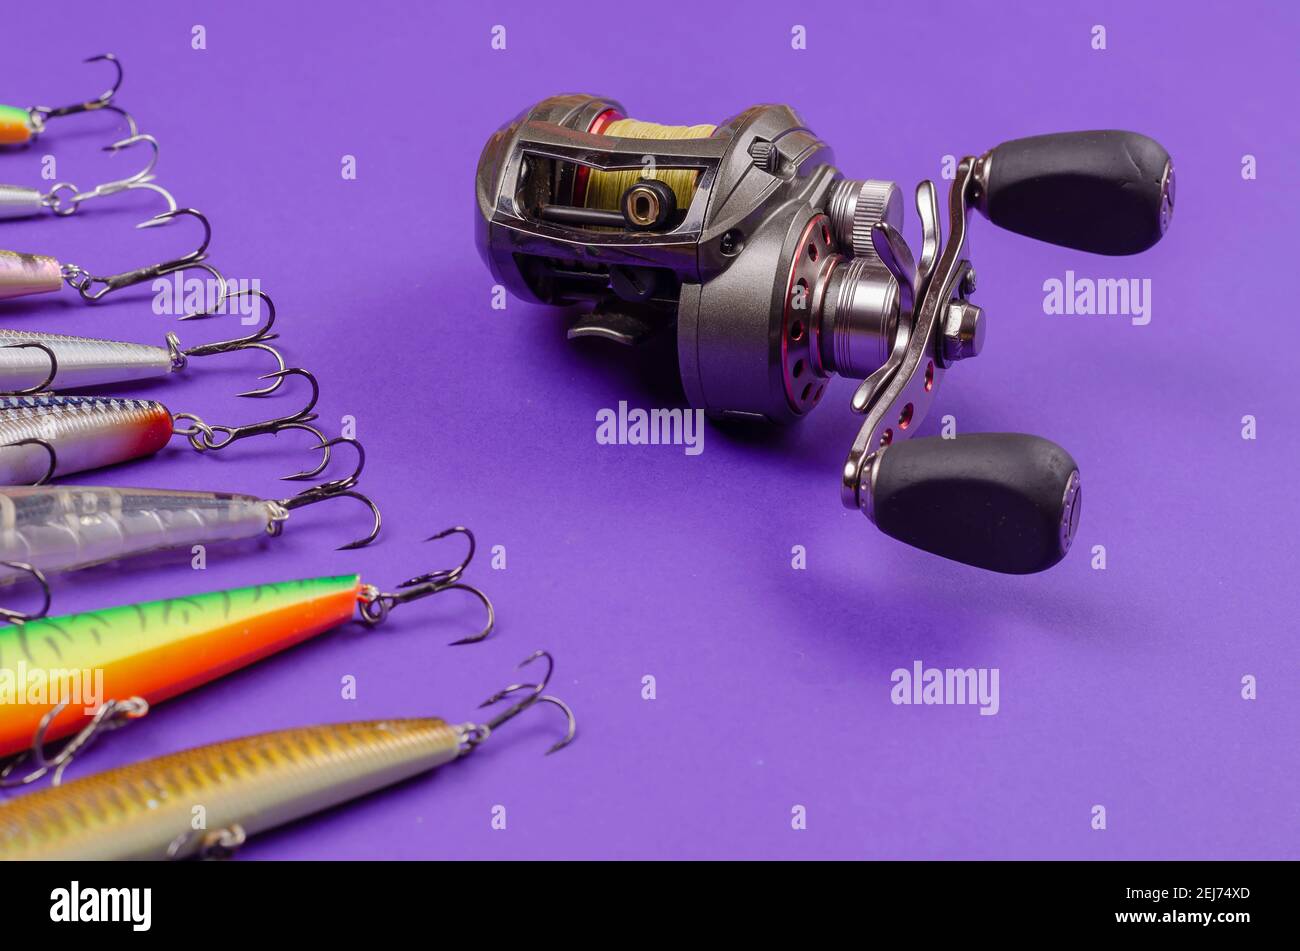 https://c8.alamy.com/comp/2EJ74XD/artificial-lures-for-fishing-for-predatory-fish-and-a-fishing-reel-on-a-blue-background-random-wobblers-are-lined-up-baitcasting-reel-fishing-tack-2EJ74XD.jpg